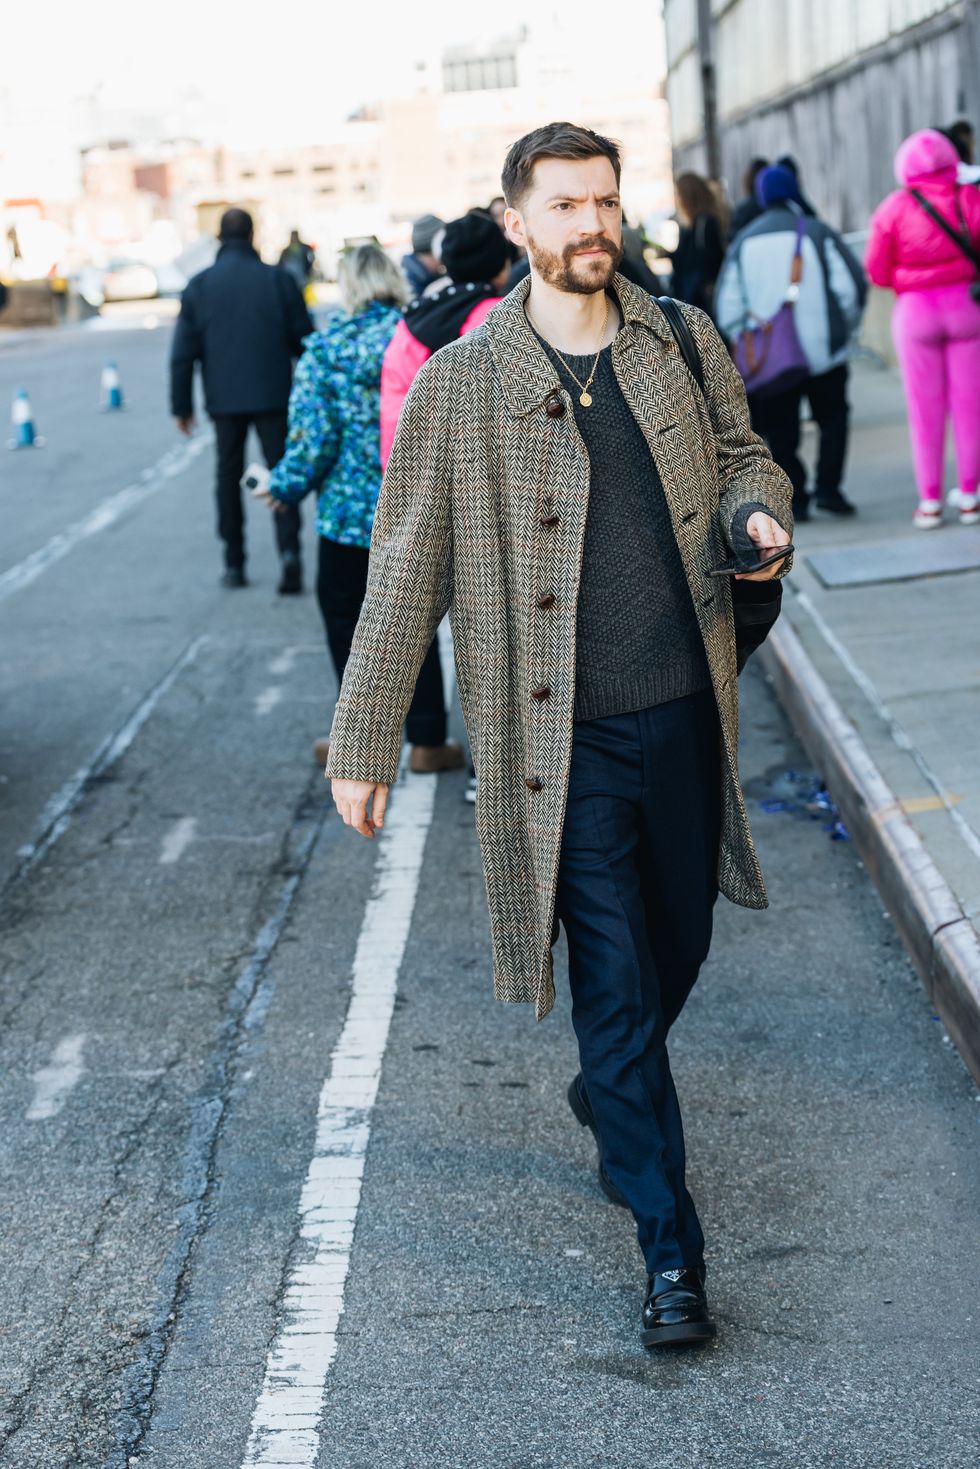 The Best Street Style From New York Fashion Week's Fall 2023 Shows